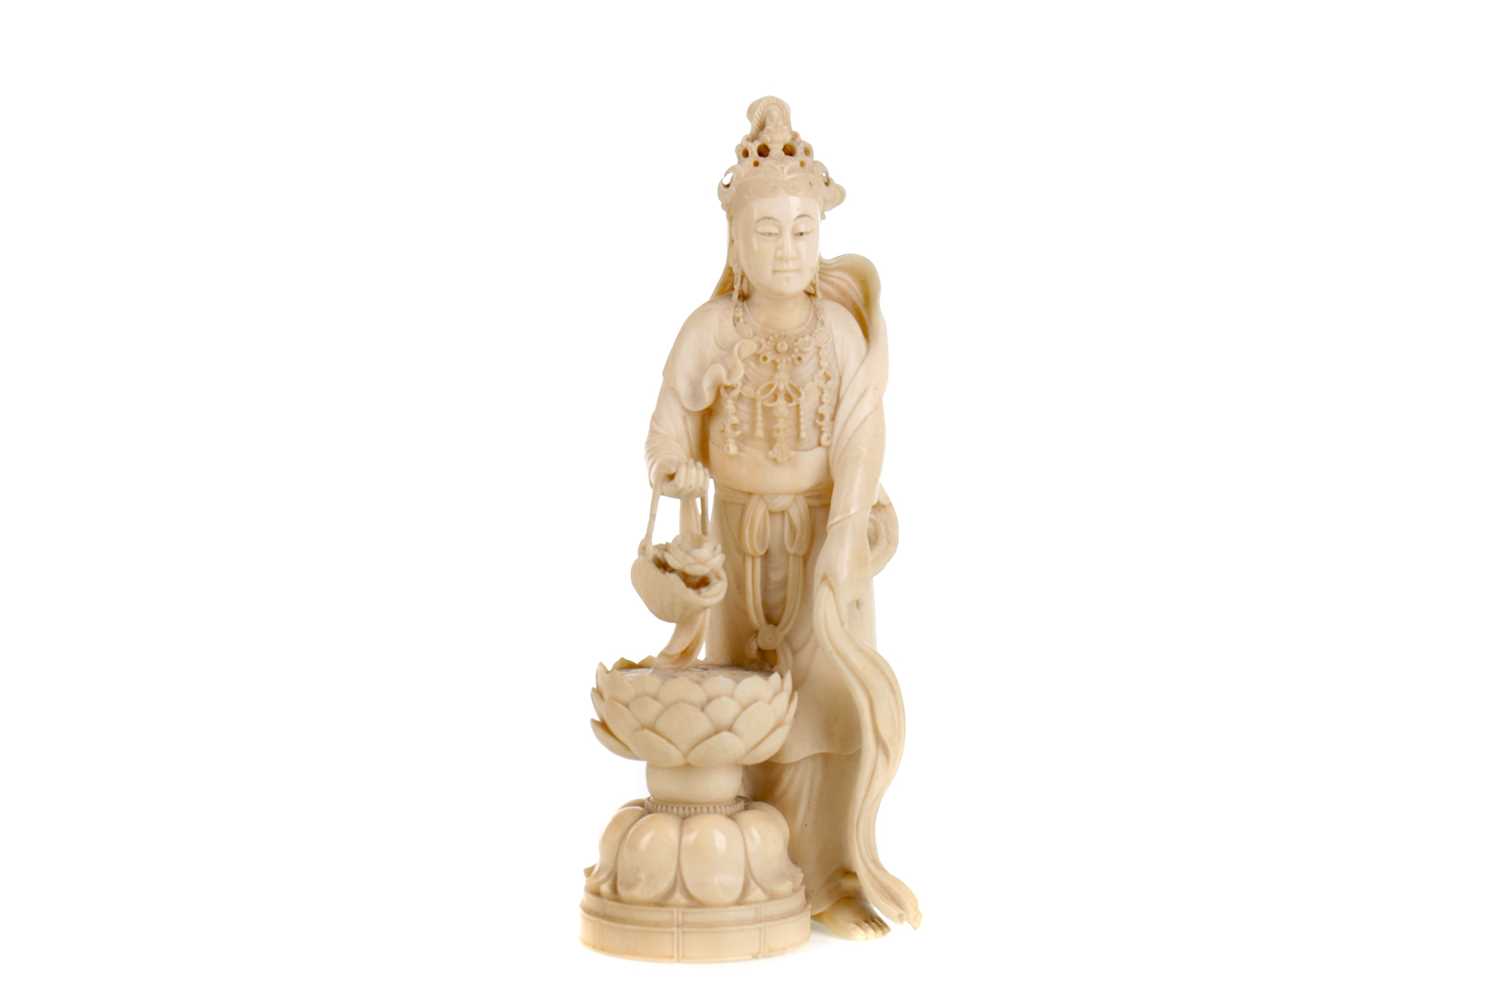 Lot 721 - AN EARLY 20TH CENTURY JAPANESE IVORY CARVING